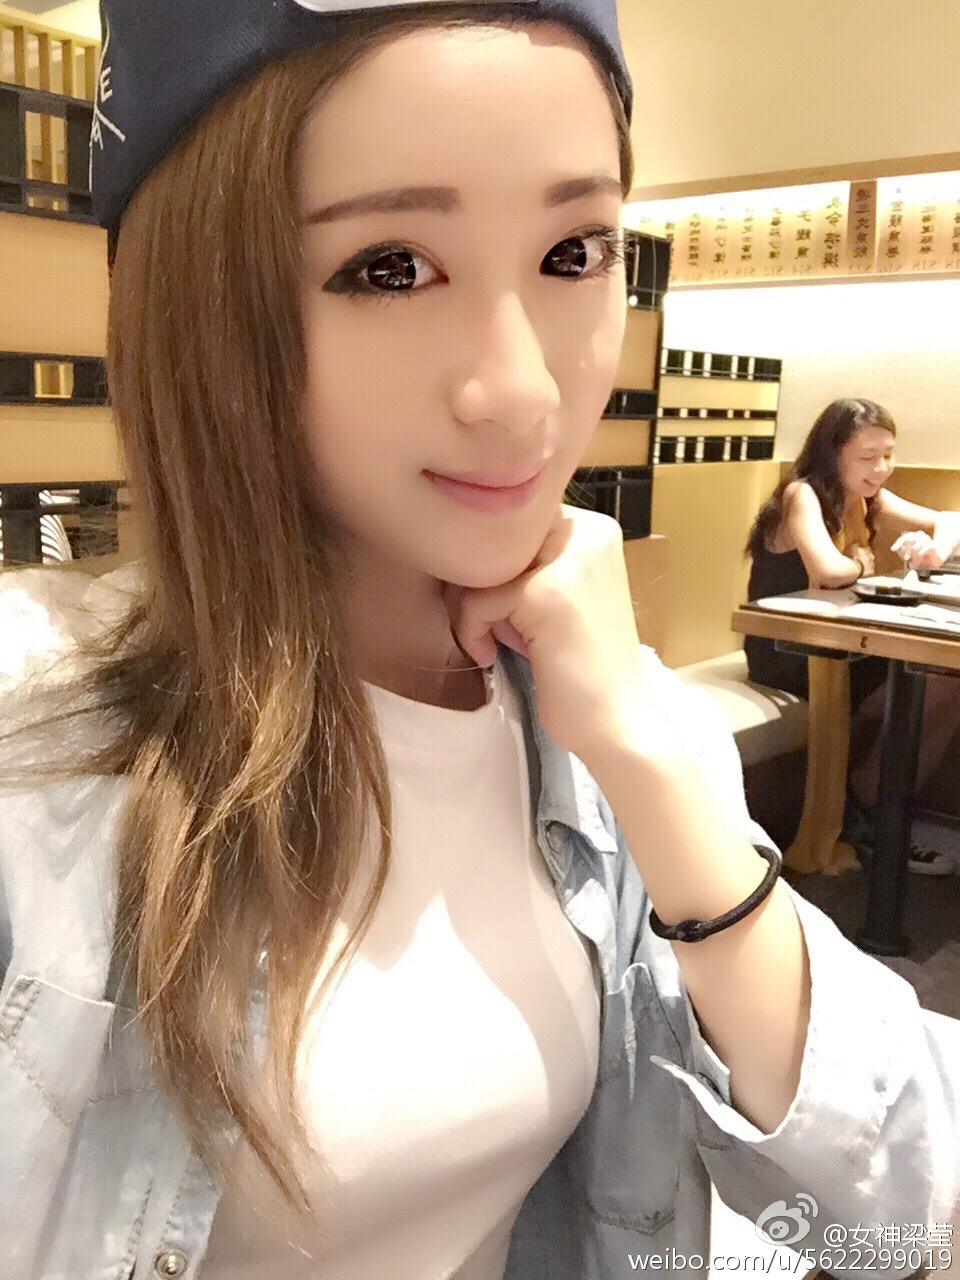 Sugar Liang Ying's sexy microblog picture package